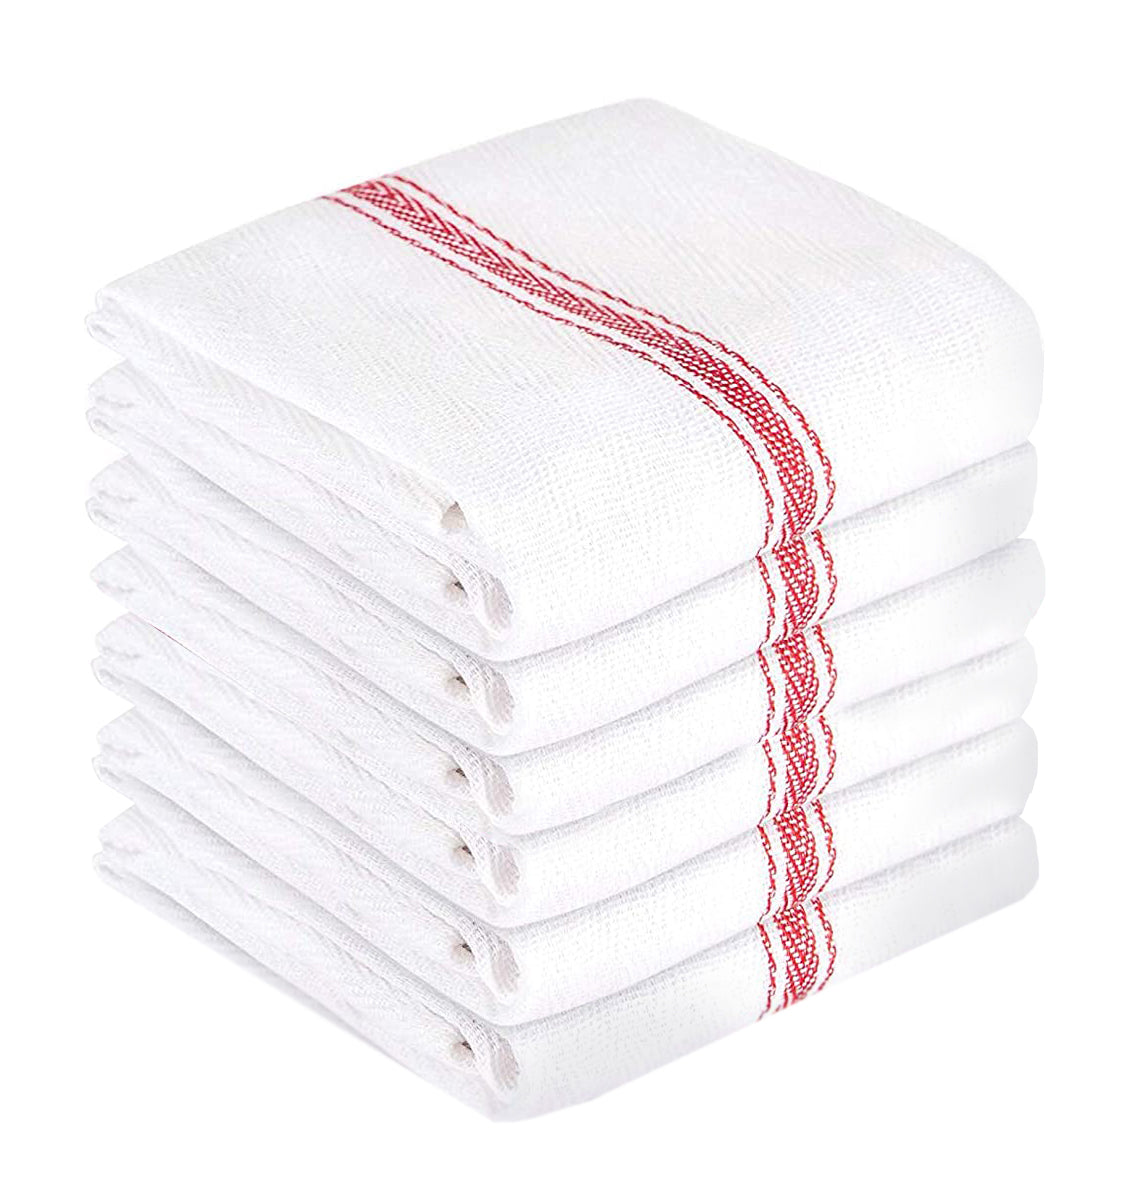 Super Absorbent Dish Rags | Pack 2-12 | Heavy Duty | Kitchen Towels | Cotton